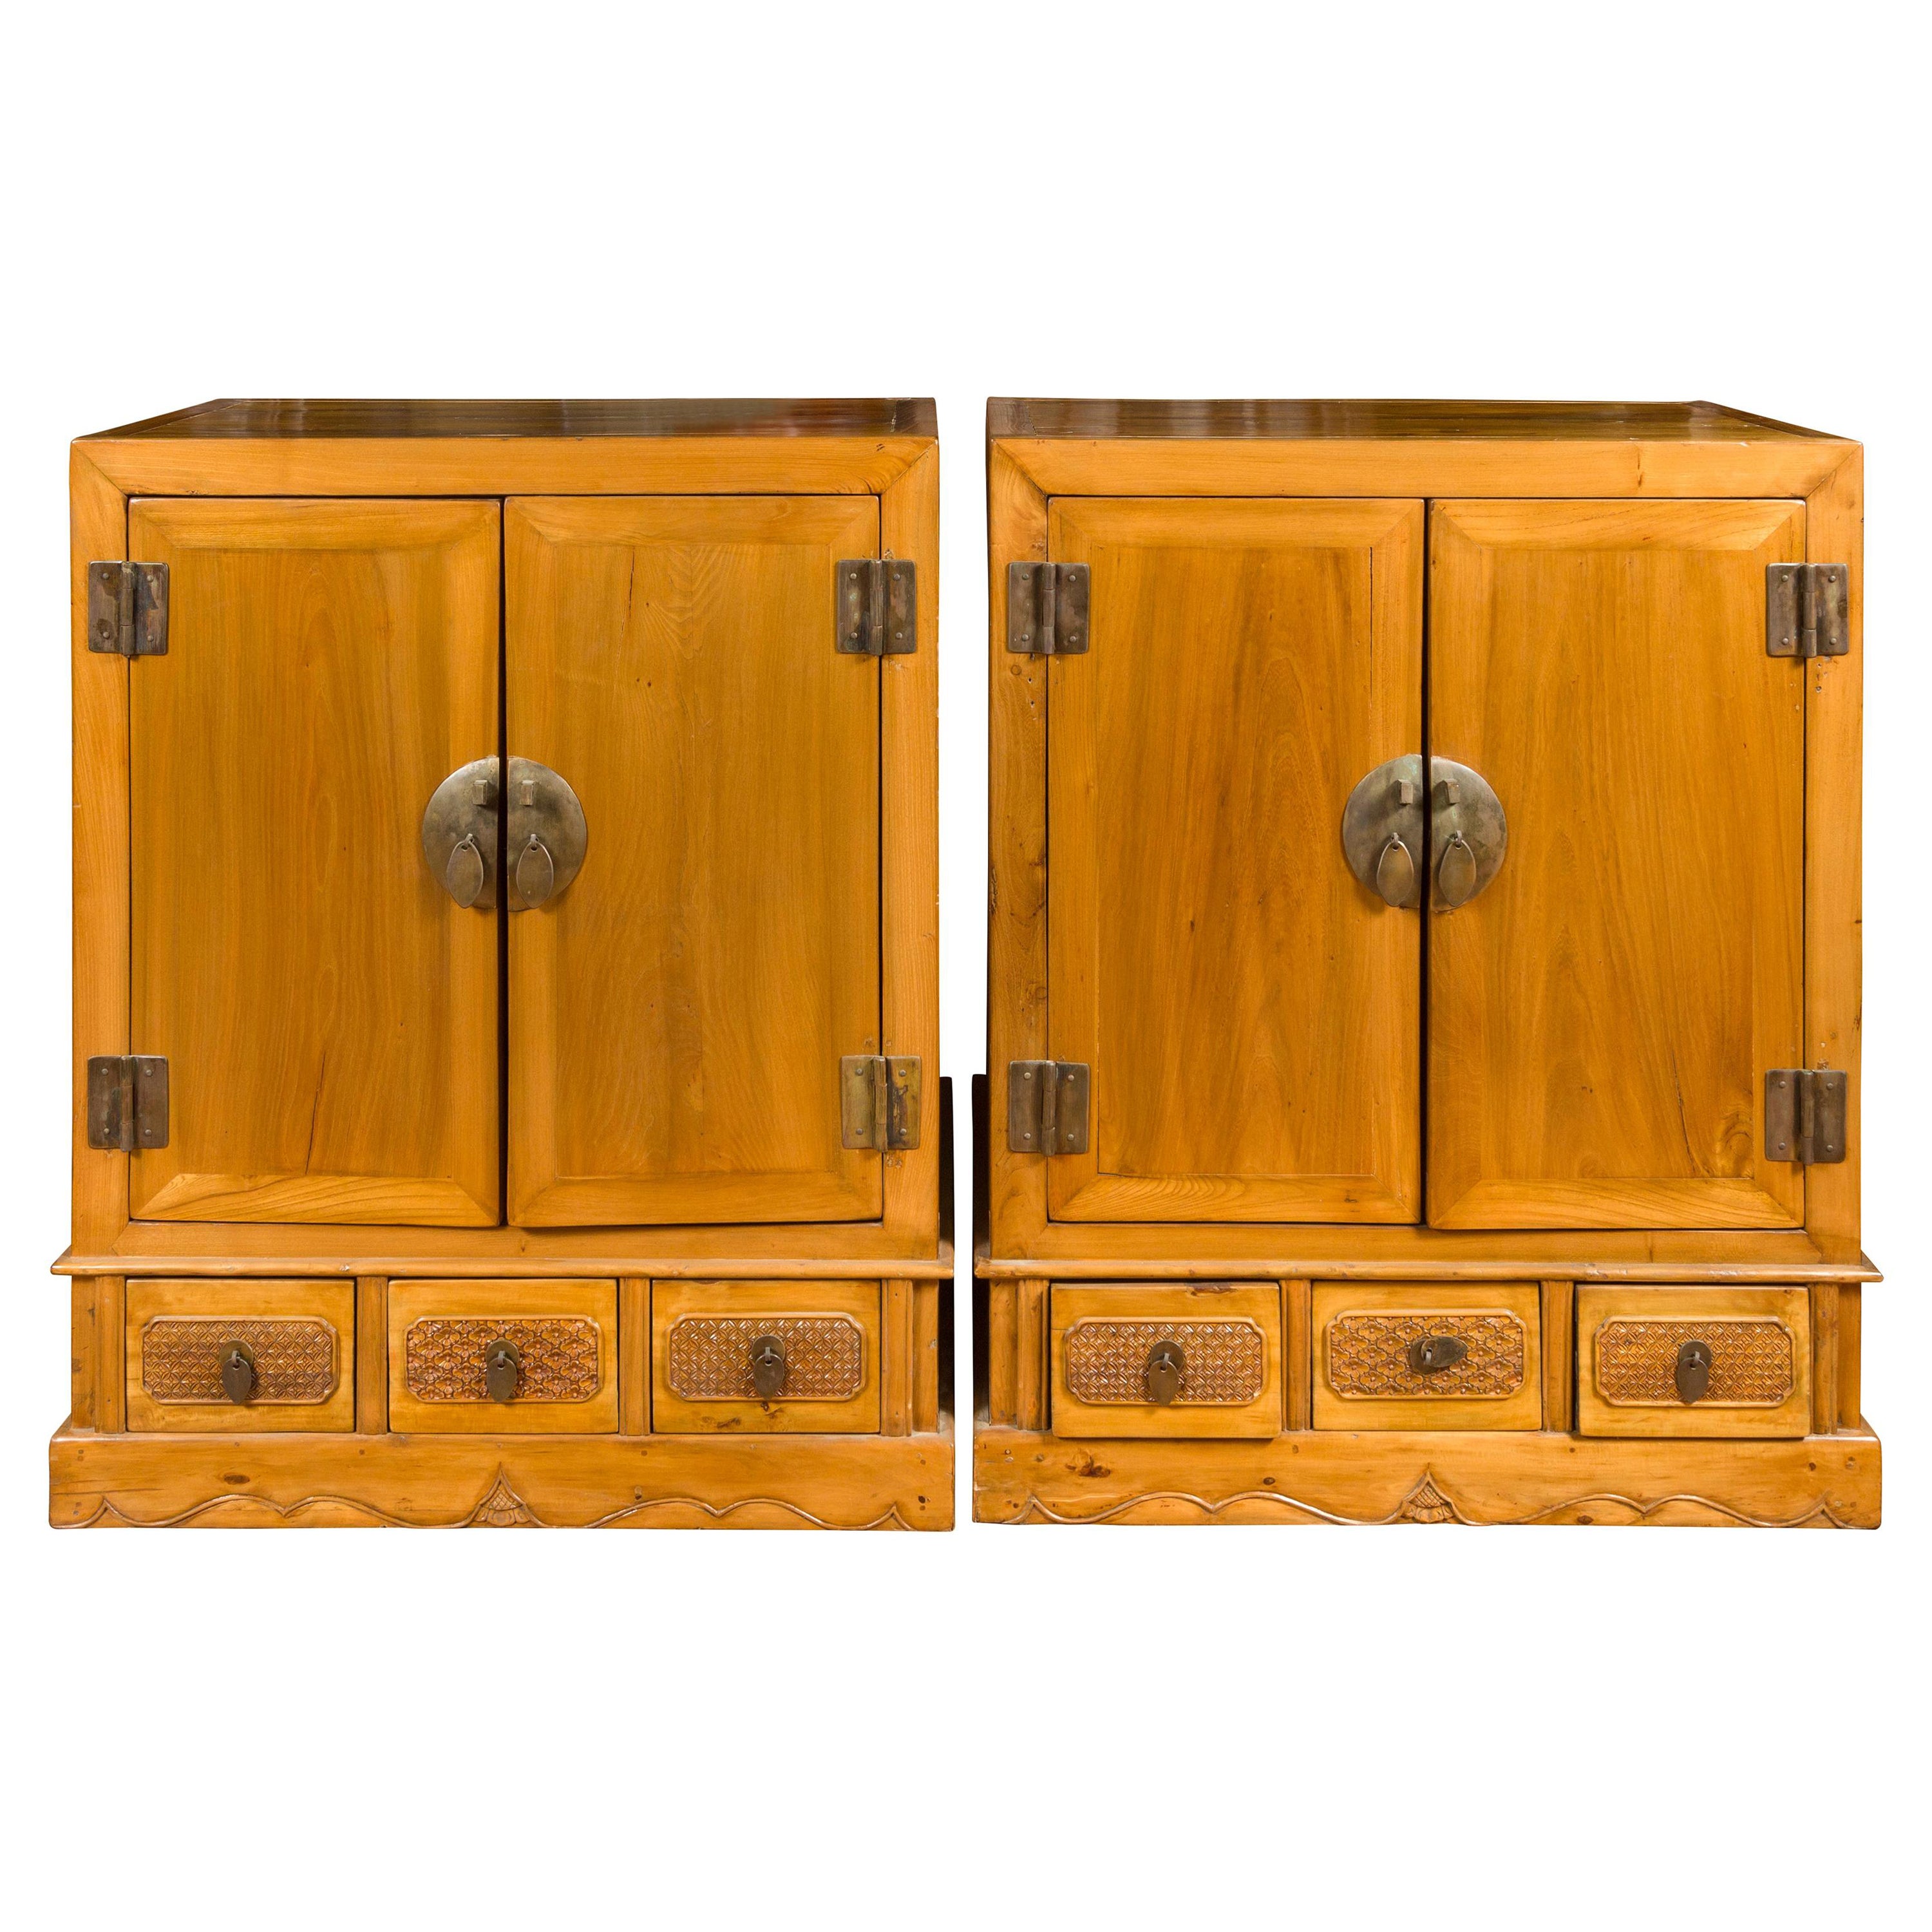 Pair of Chinese Qing Dynasty Carved Yumu Wood Cabinets with Doors and Drawers